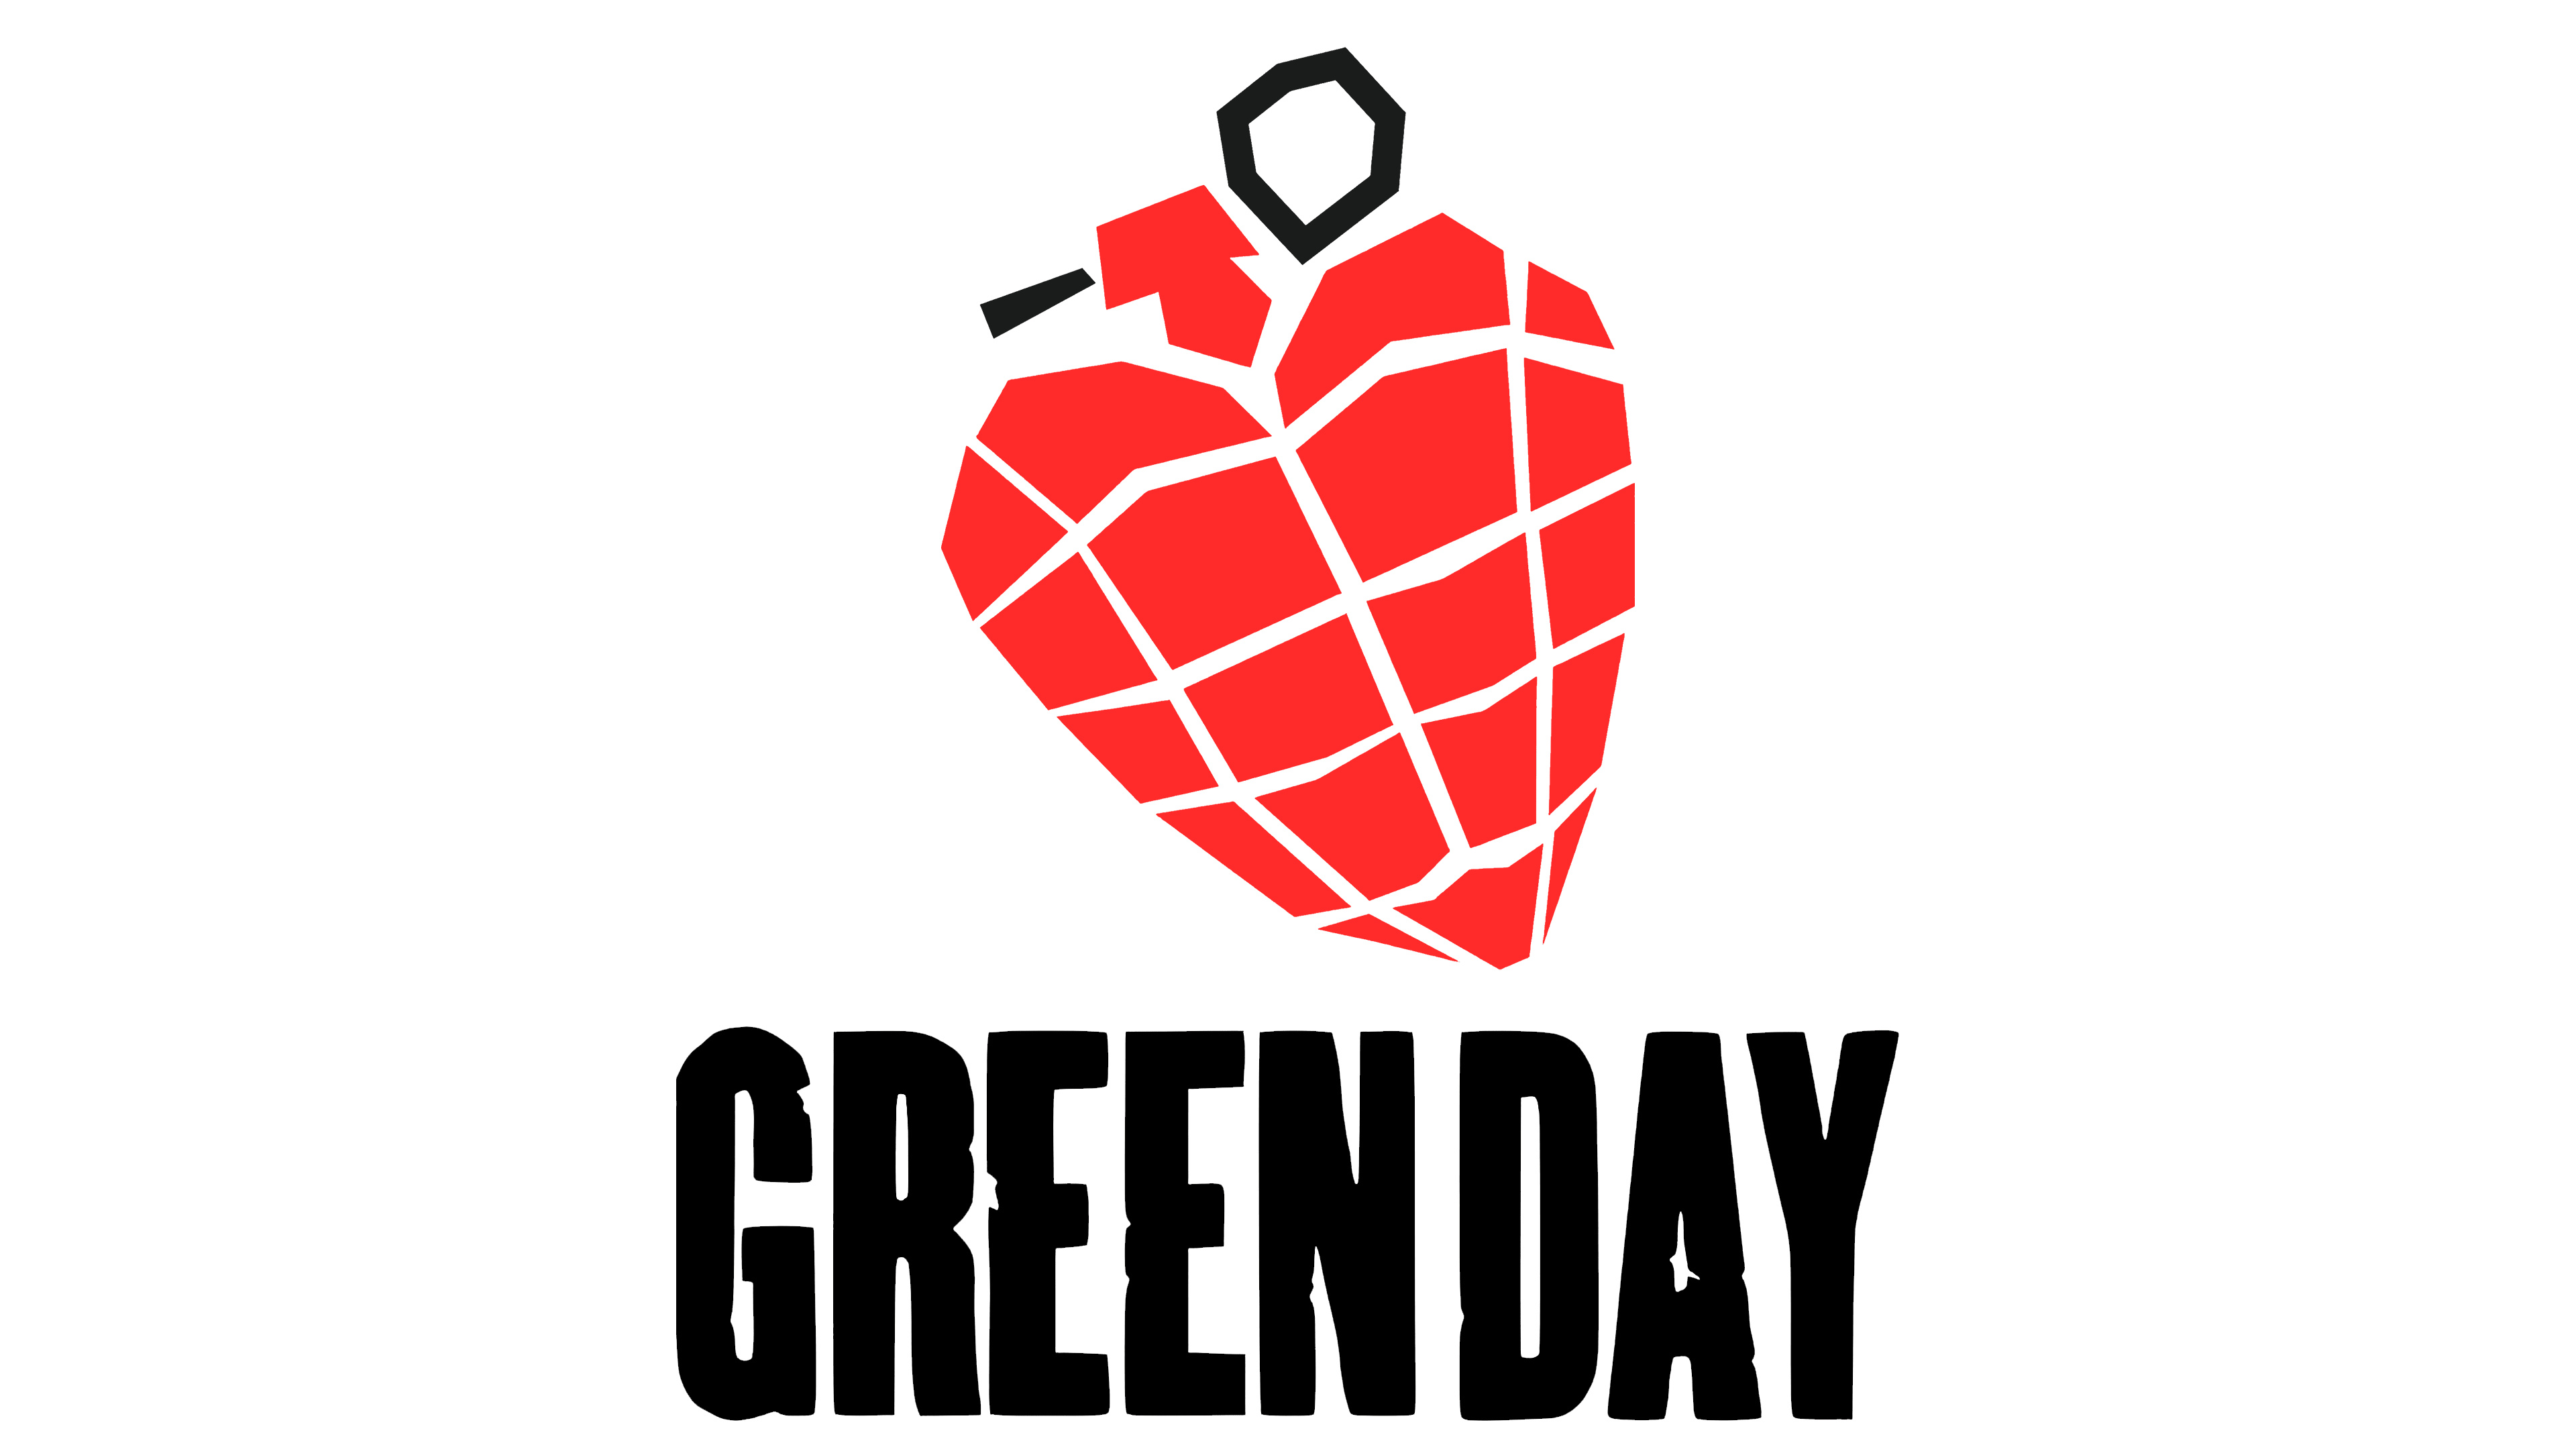 Green Day (Band): Record of the Year for Boulevard of Broken Dreams, and Best Musical Show Album for American Idiot: The Original Broadway Cast Recording. 3840x2160 4K Wallpaper.